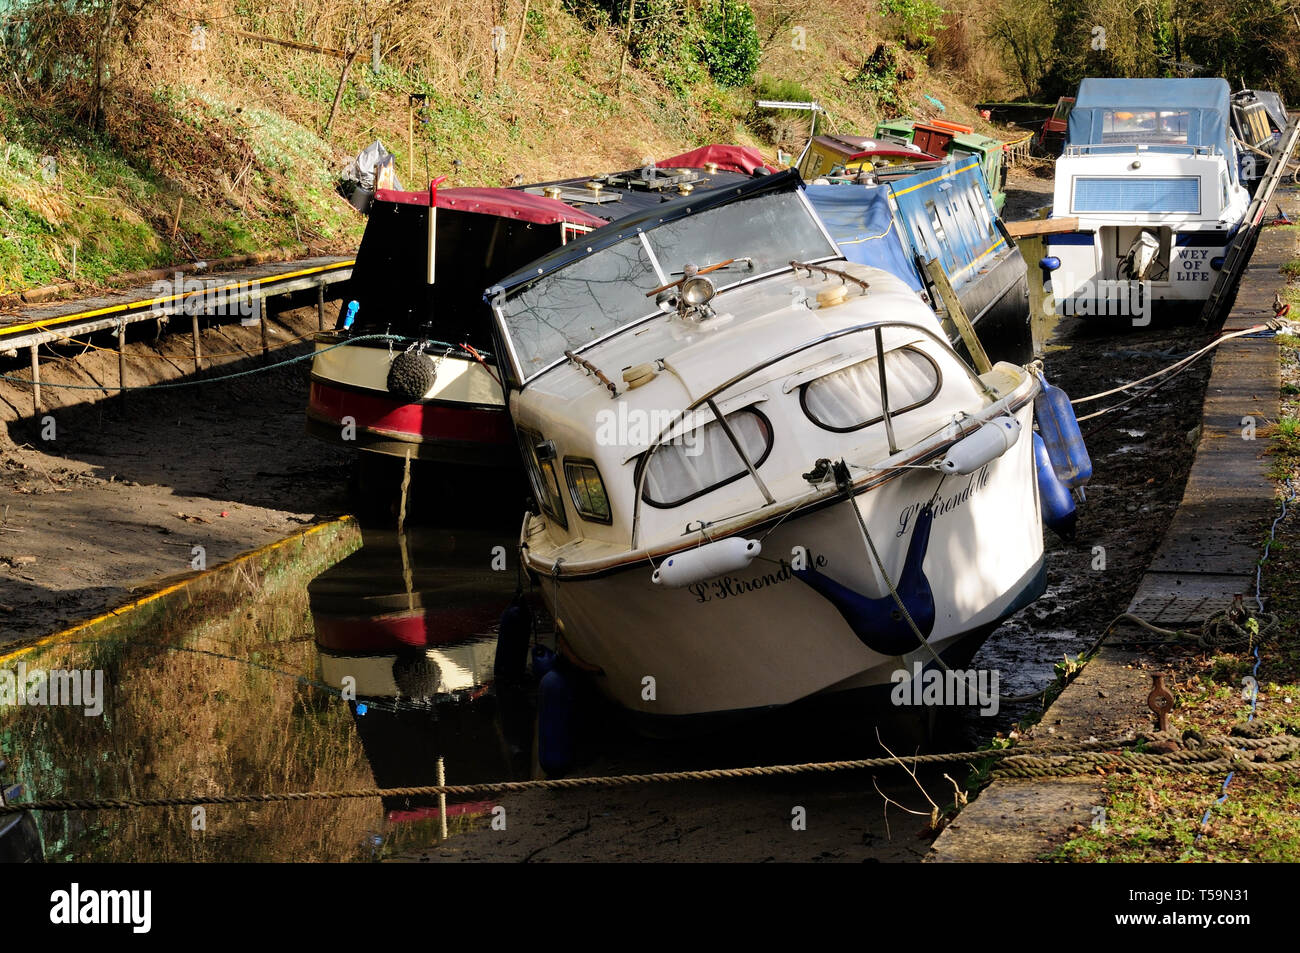 Boats grounded in an empty canal that has been drained for maintenance purposes. Stock Photo